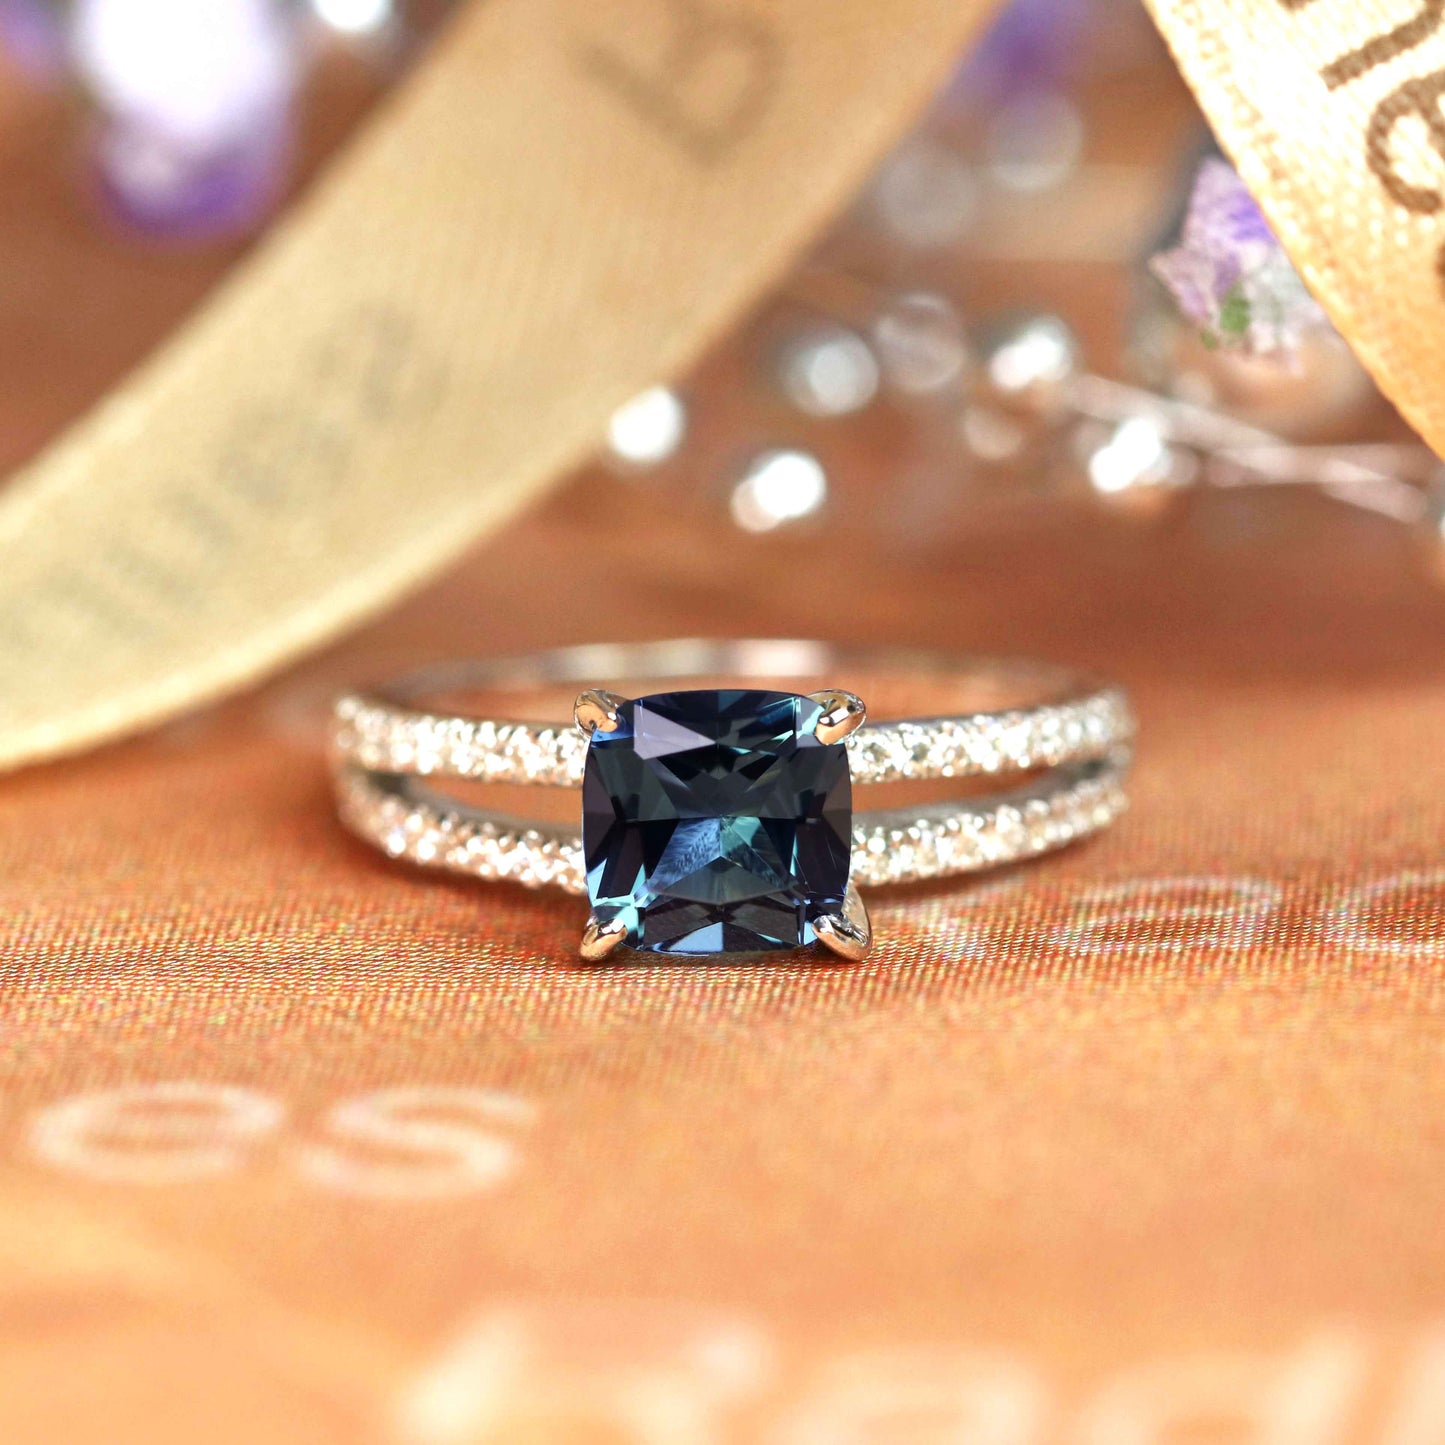 1.25 carat Cushion Cut Alexandrite Diamond Pave Split Shank Solitaire Engagement Ring in White Gold